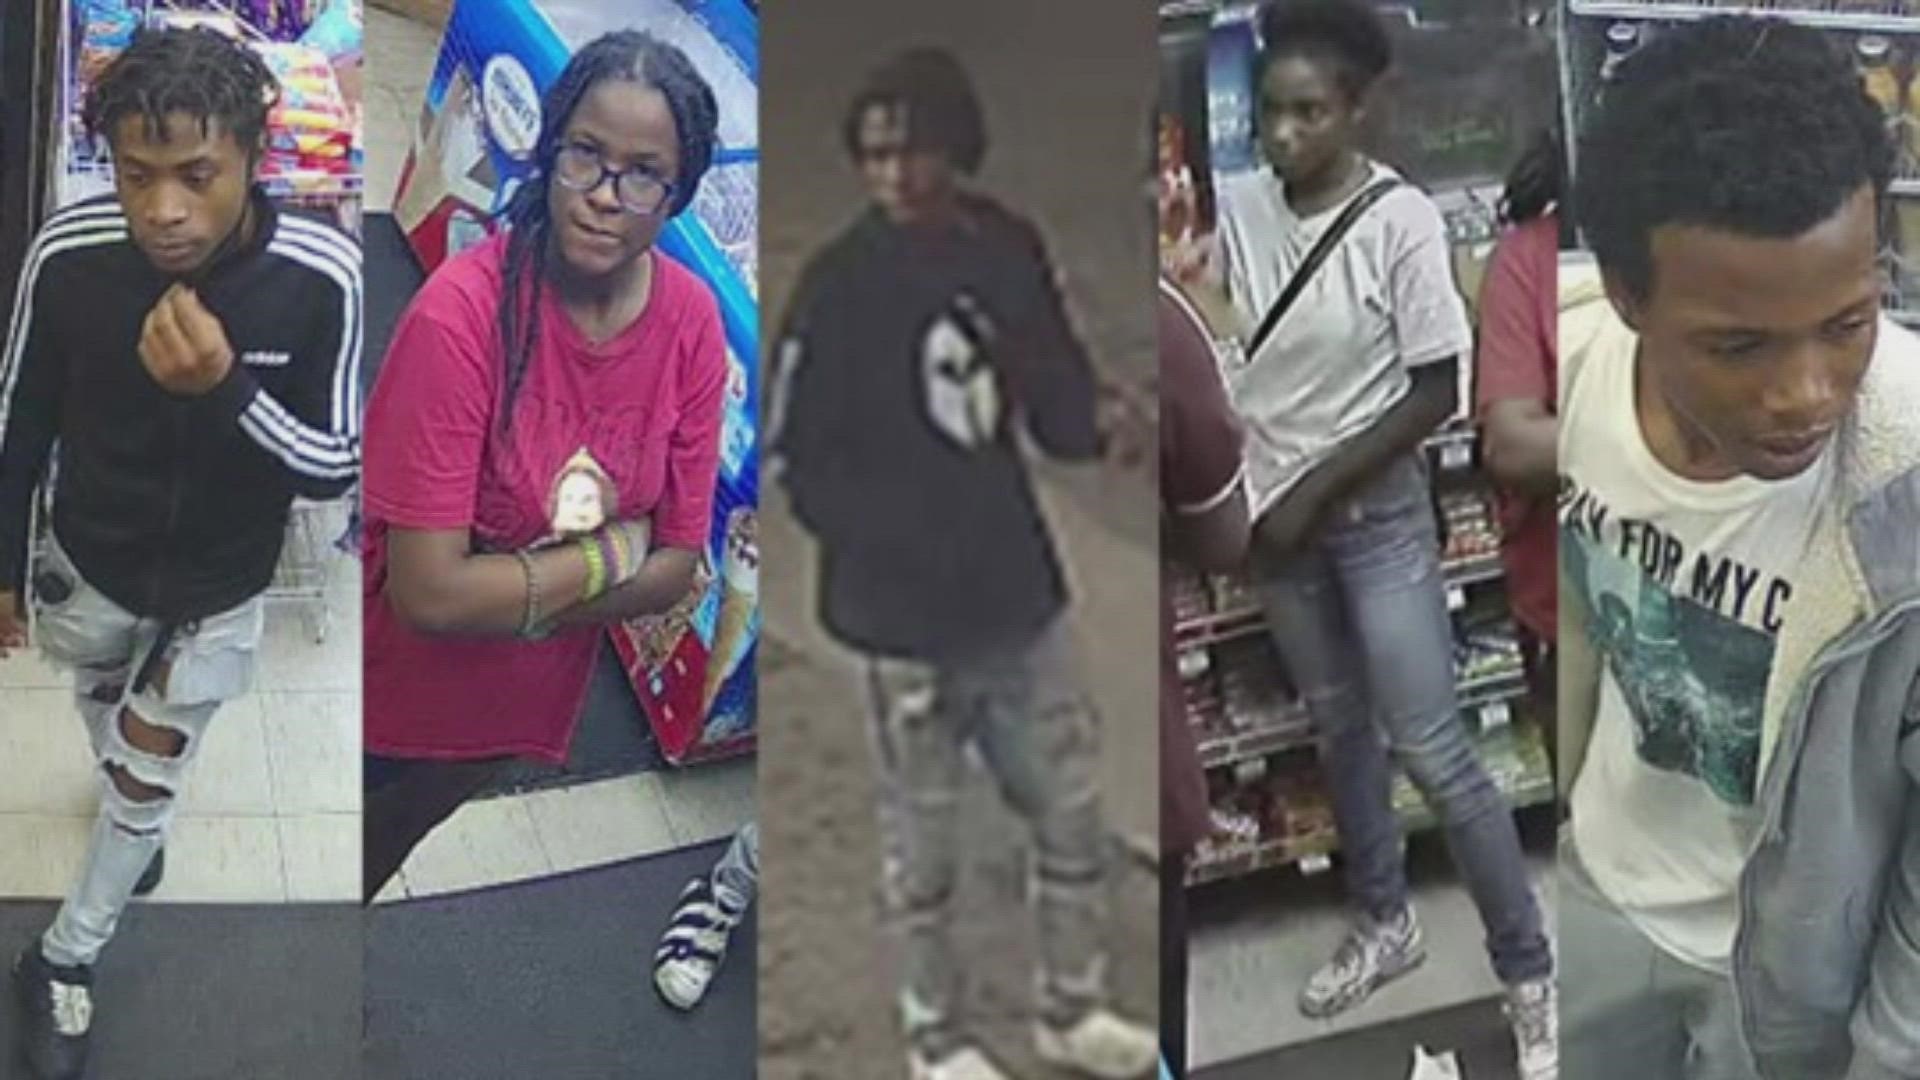 The Columbus Division of Police released photos of five suspects from a shooting at a Sunoco gas station in South Linden.